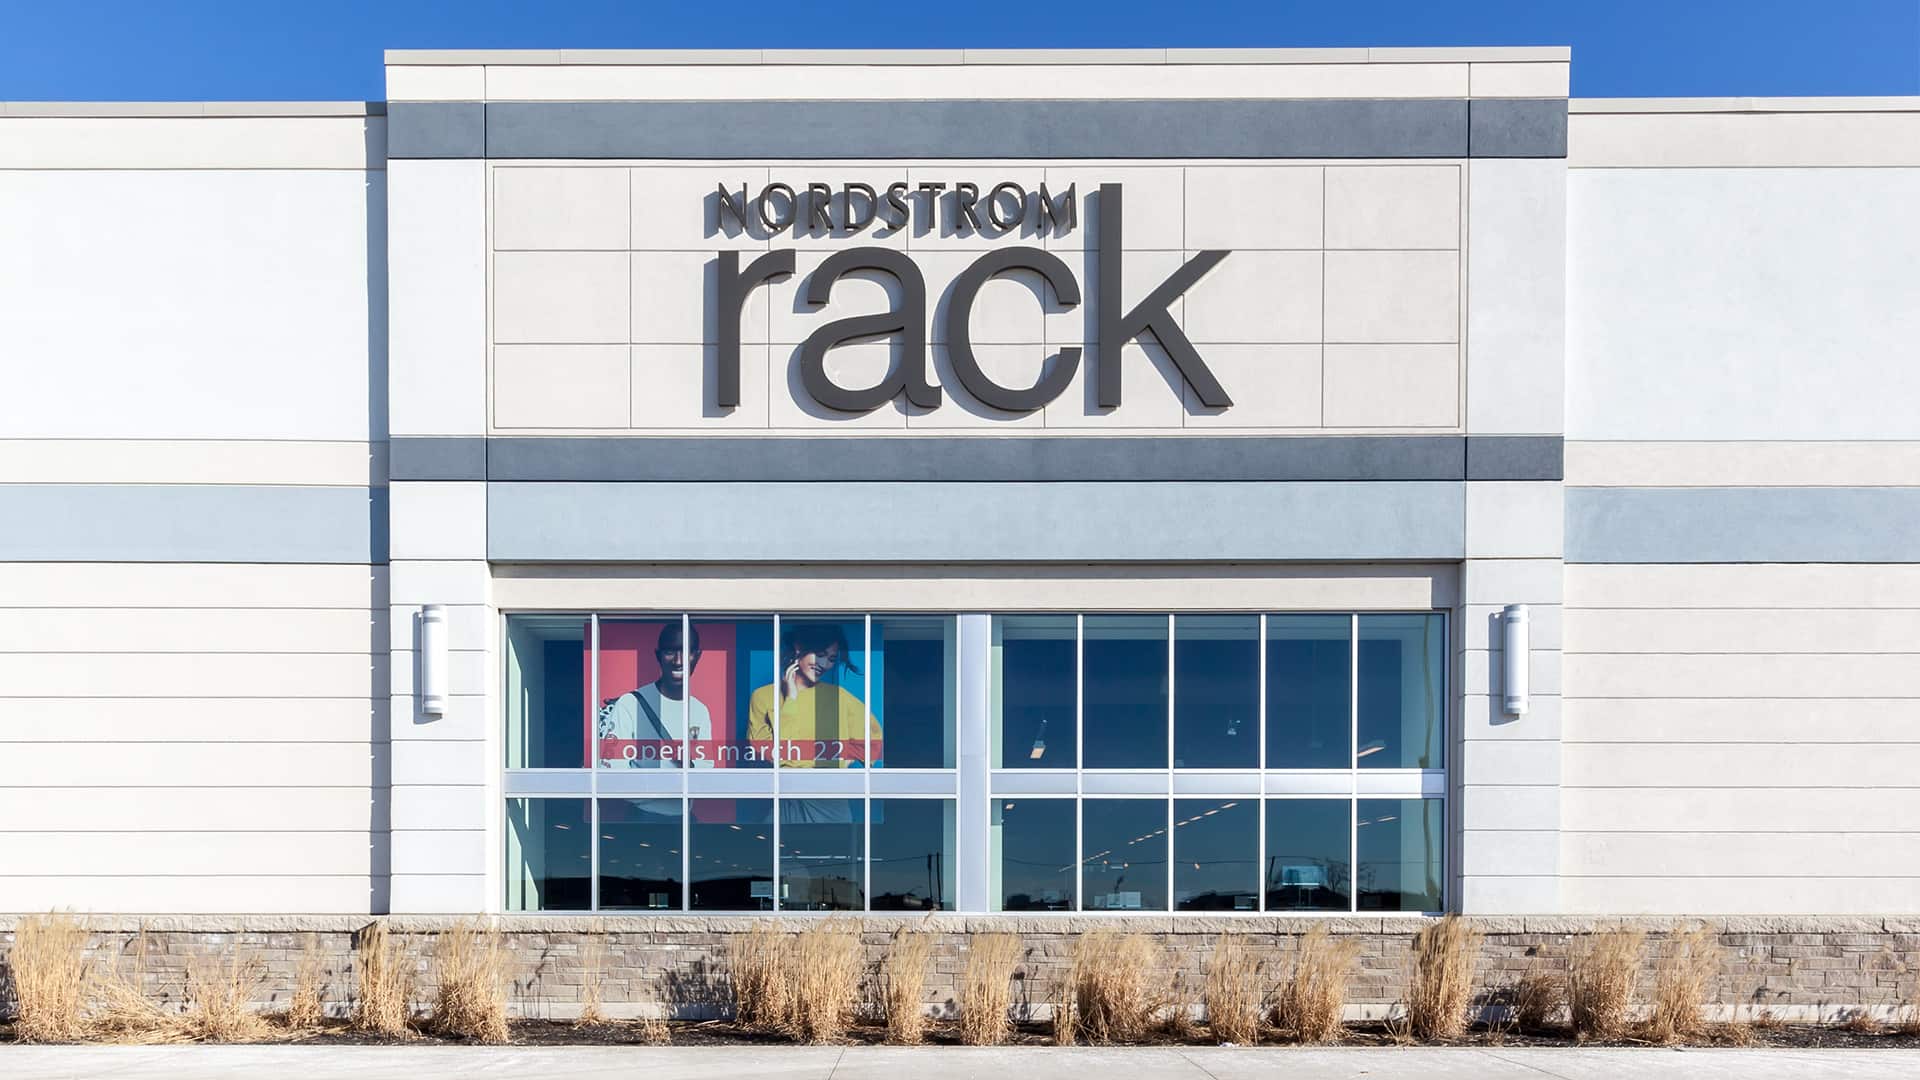 Save 25% More During Nordstrom Rack's Clear the Rack Sale